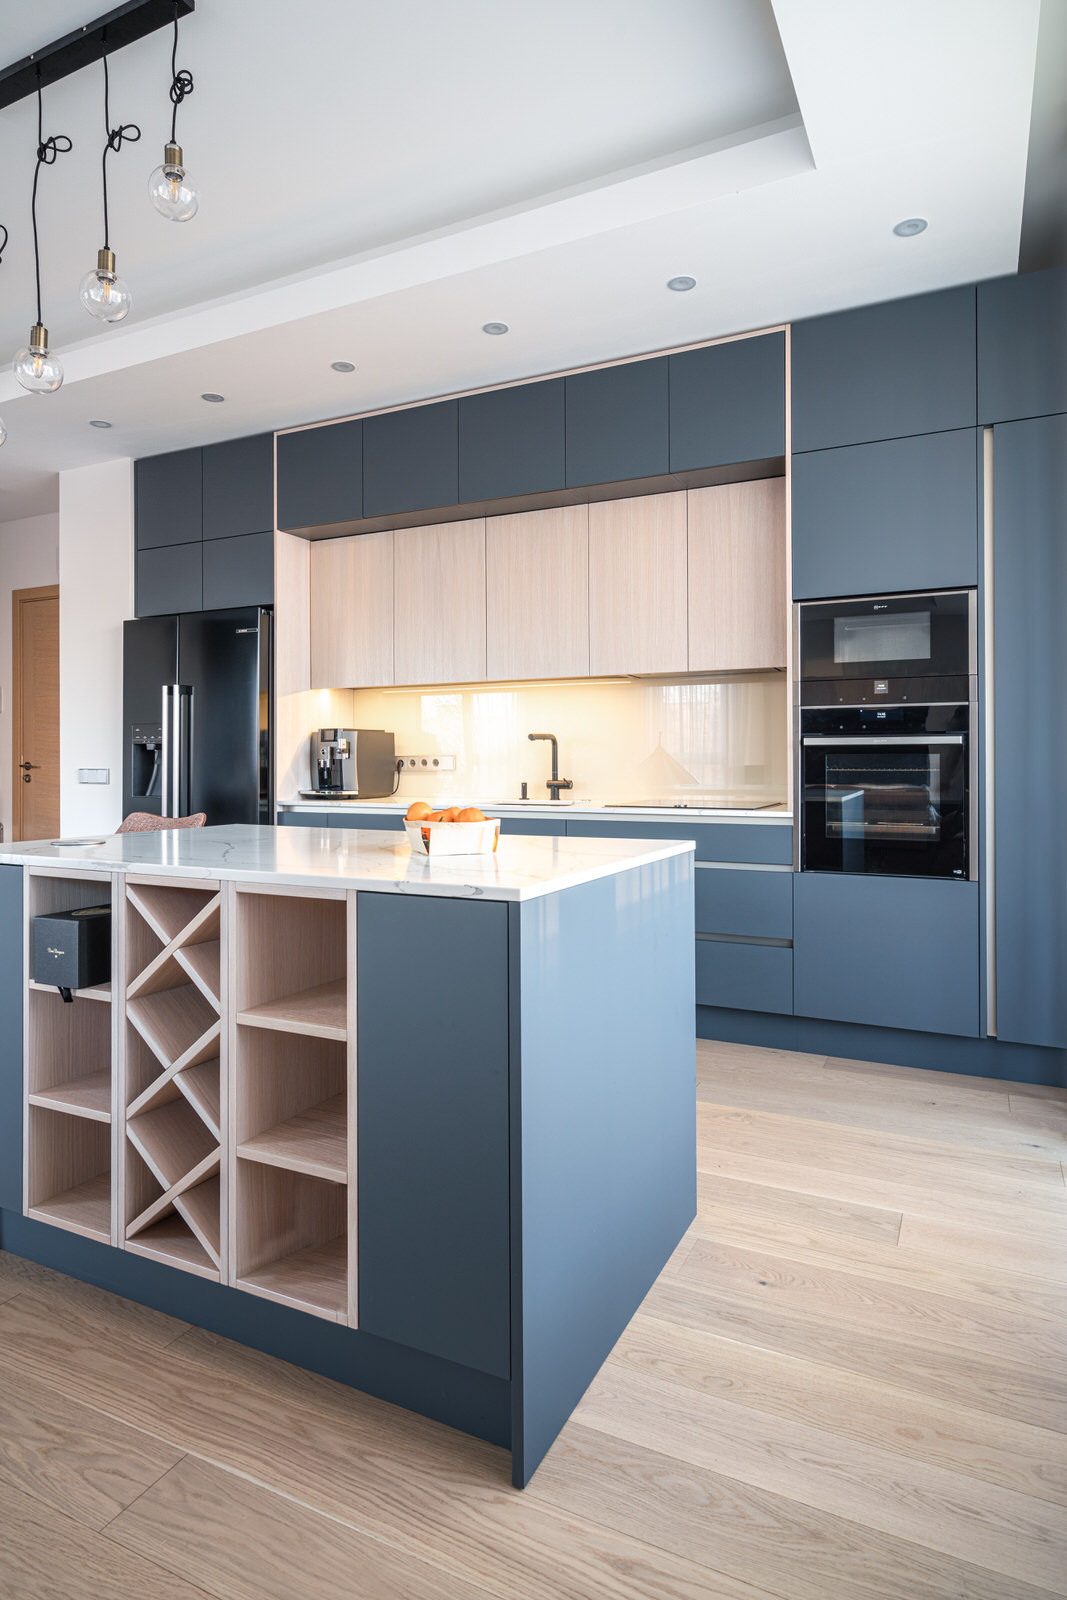 A look at elegant and functional kitchen furniture in Skanstes